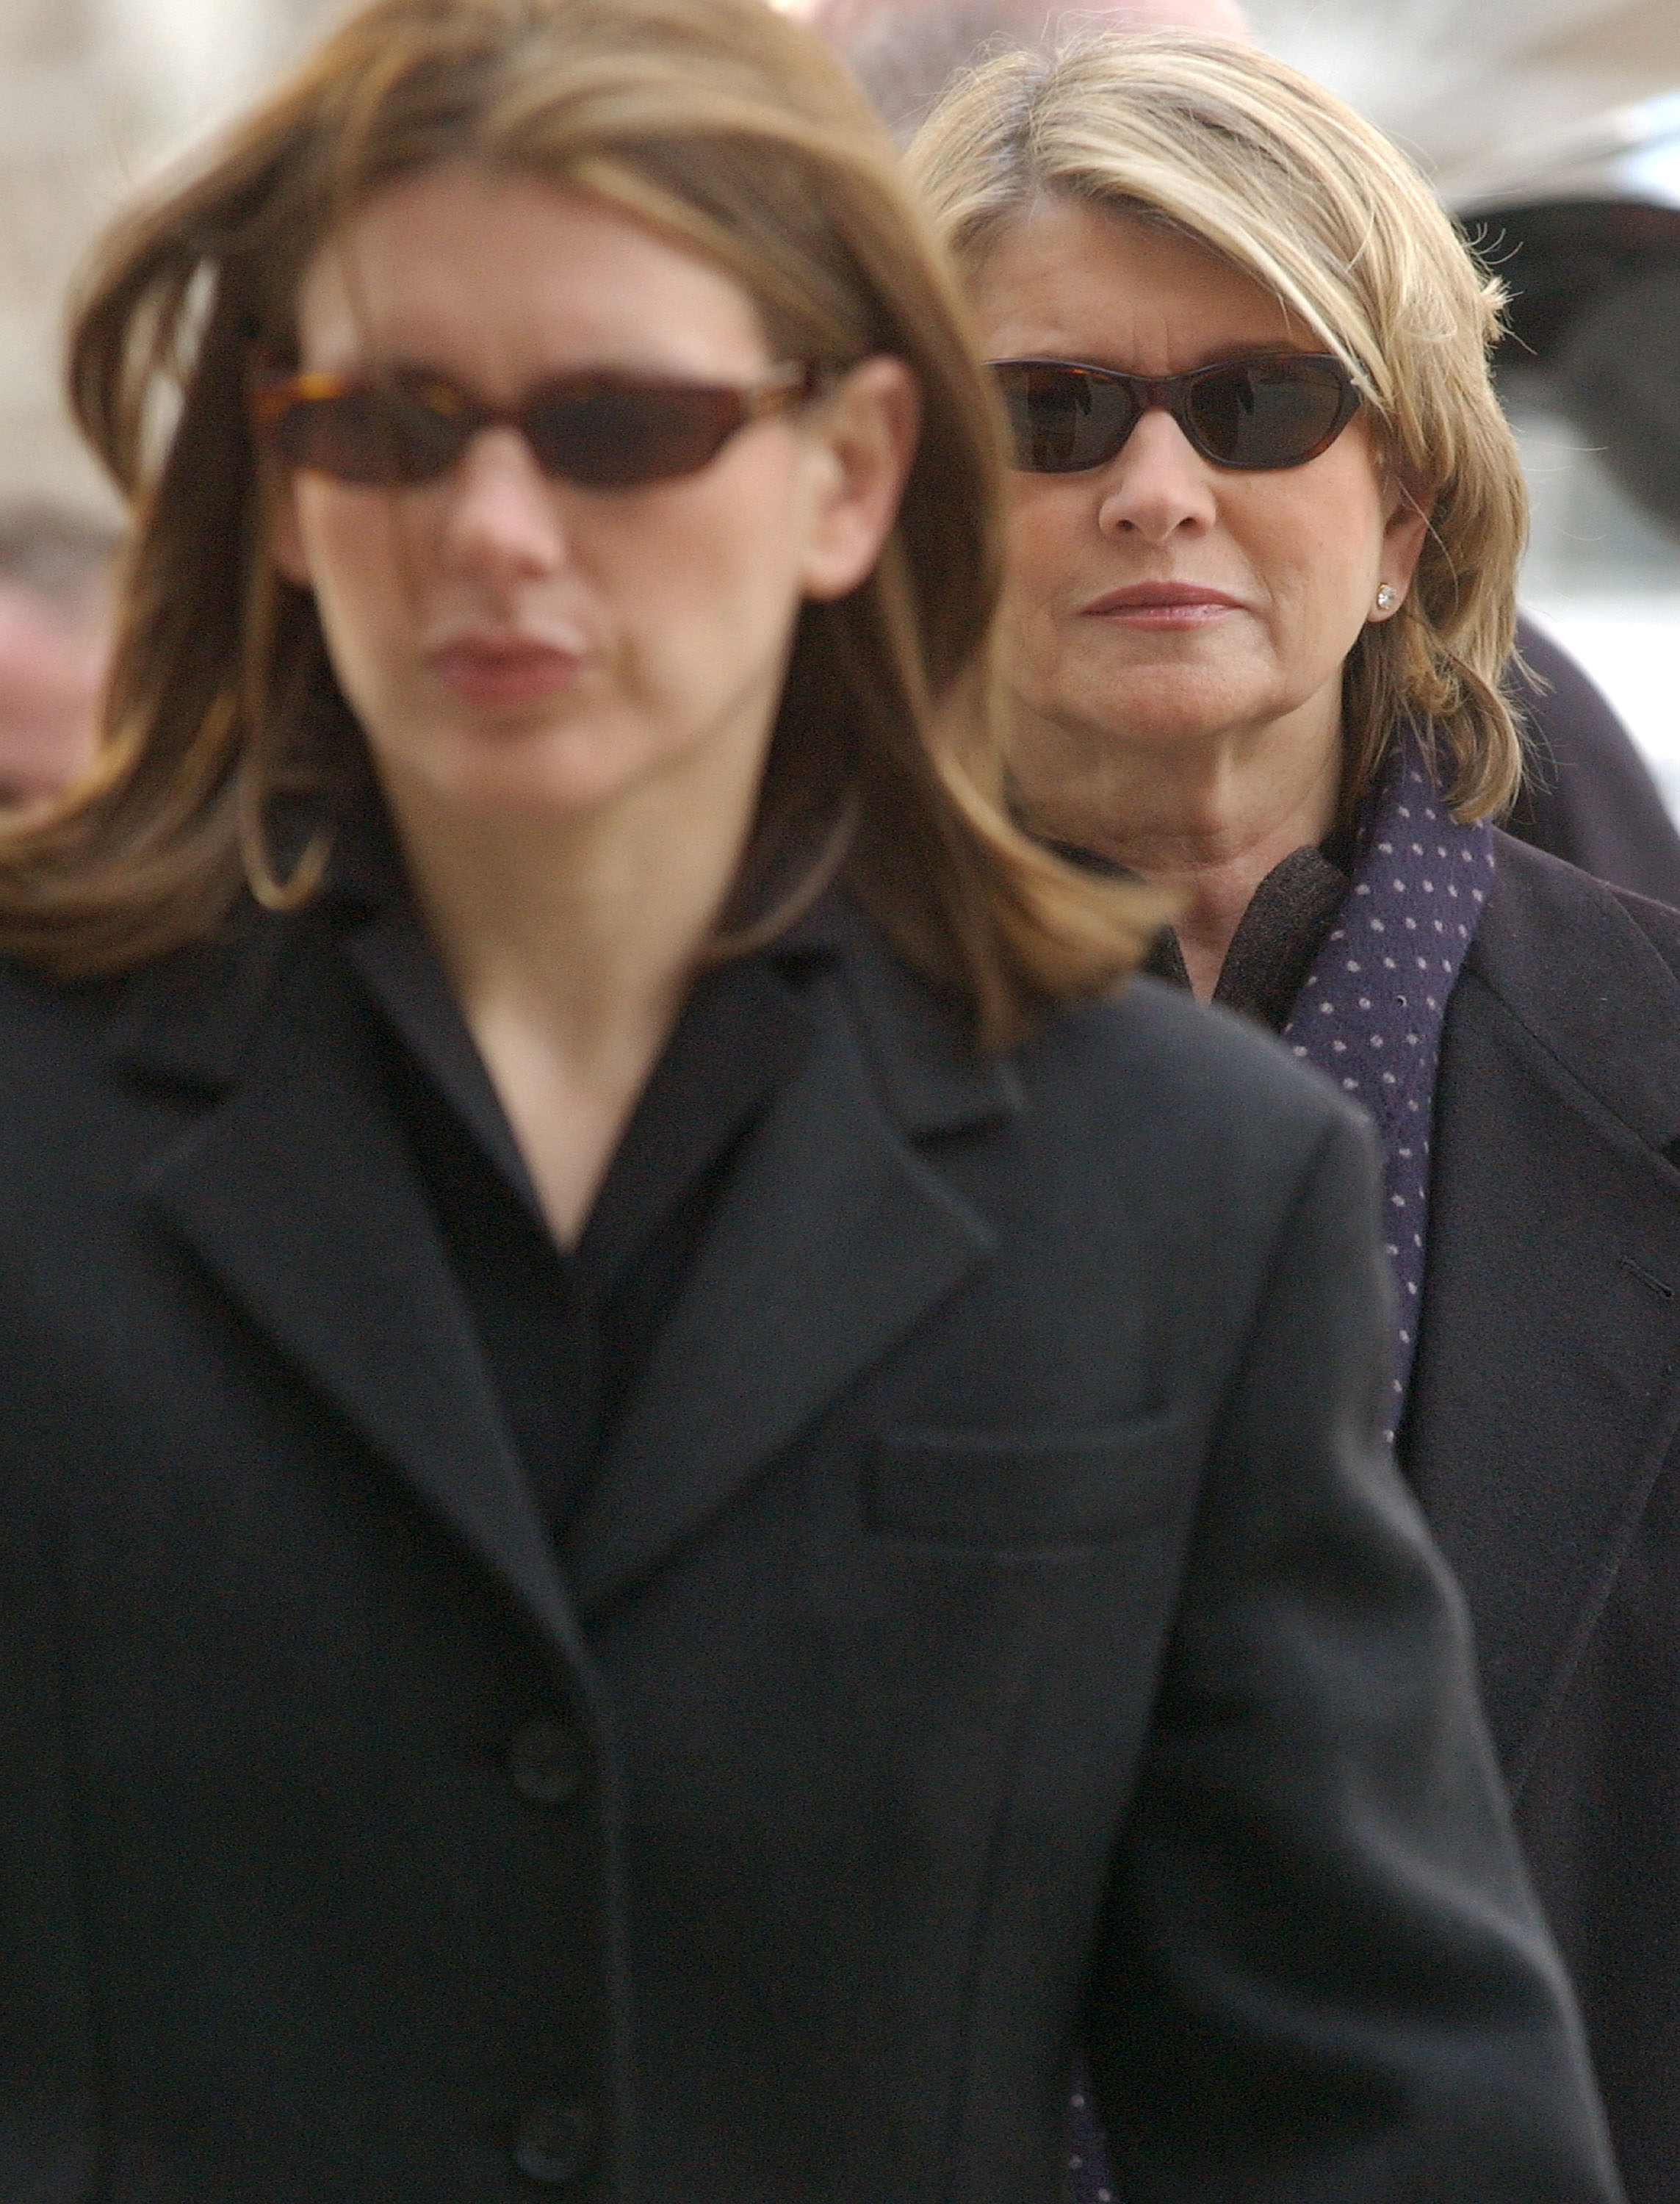 Alexis Stewart and Martha Stewart arriving at a federal court on February 9, 2004, in New York City. | Source: Getty Images